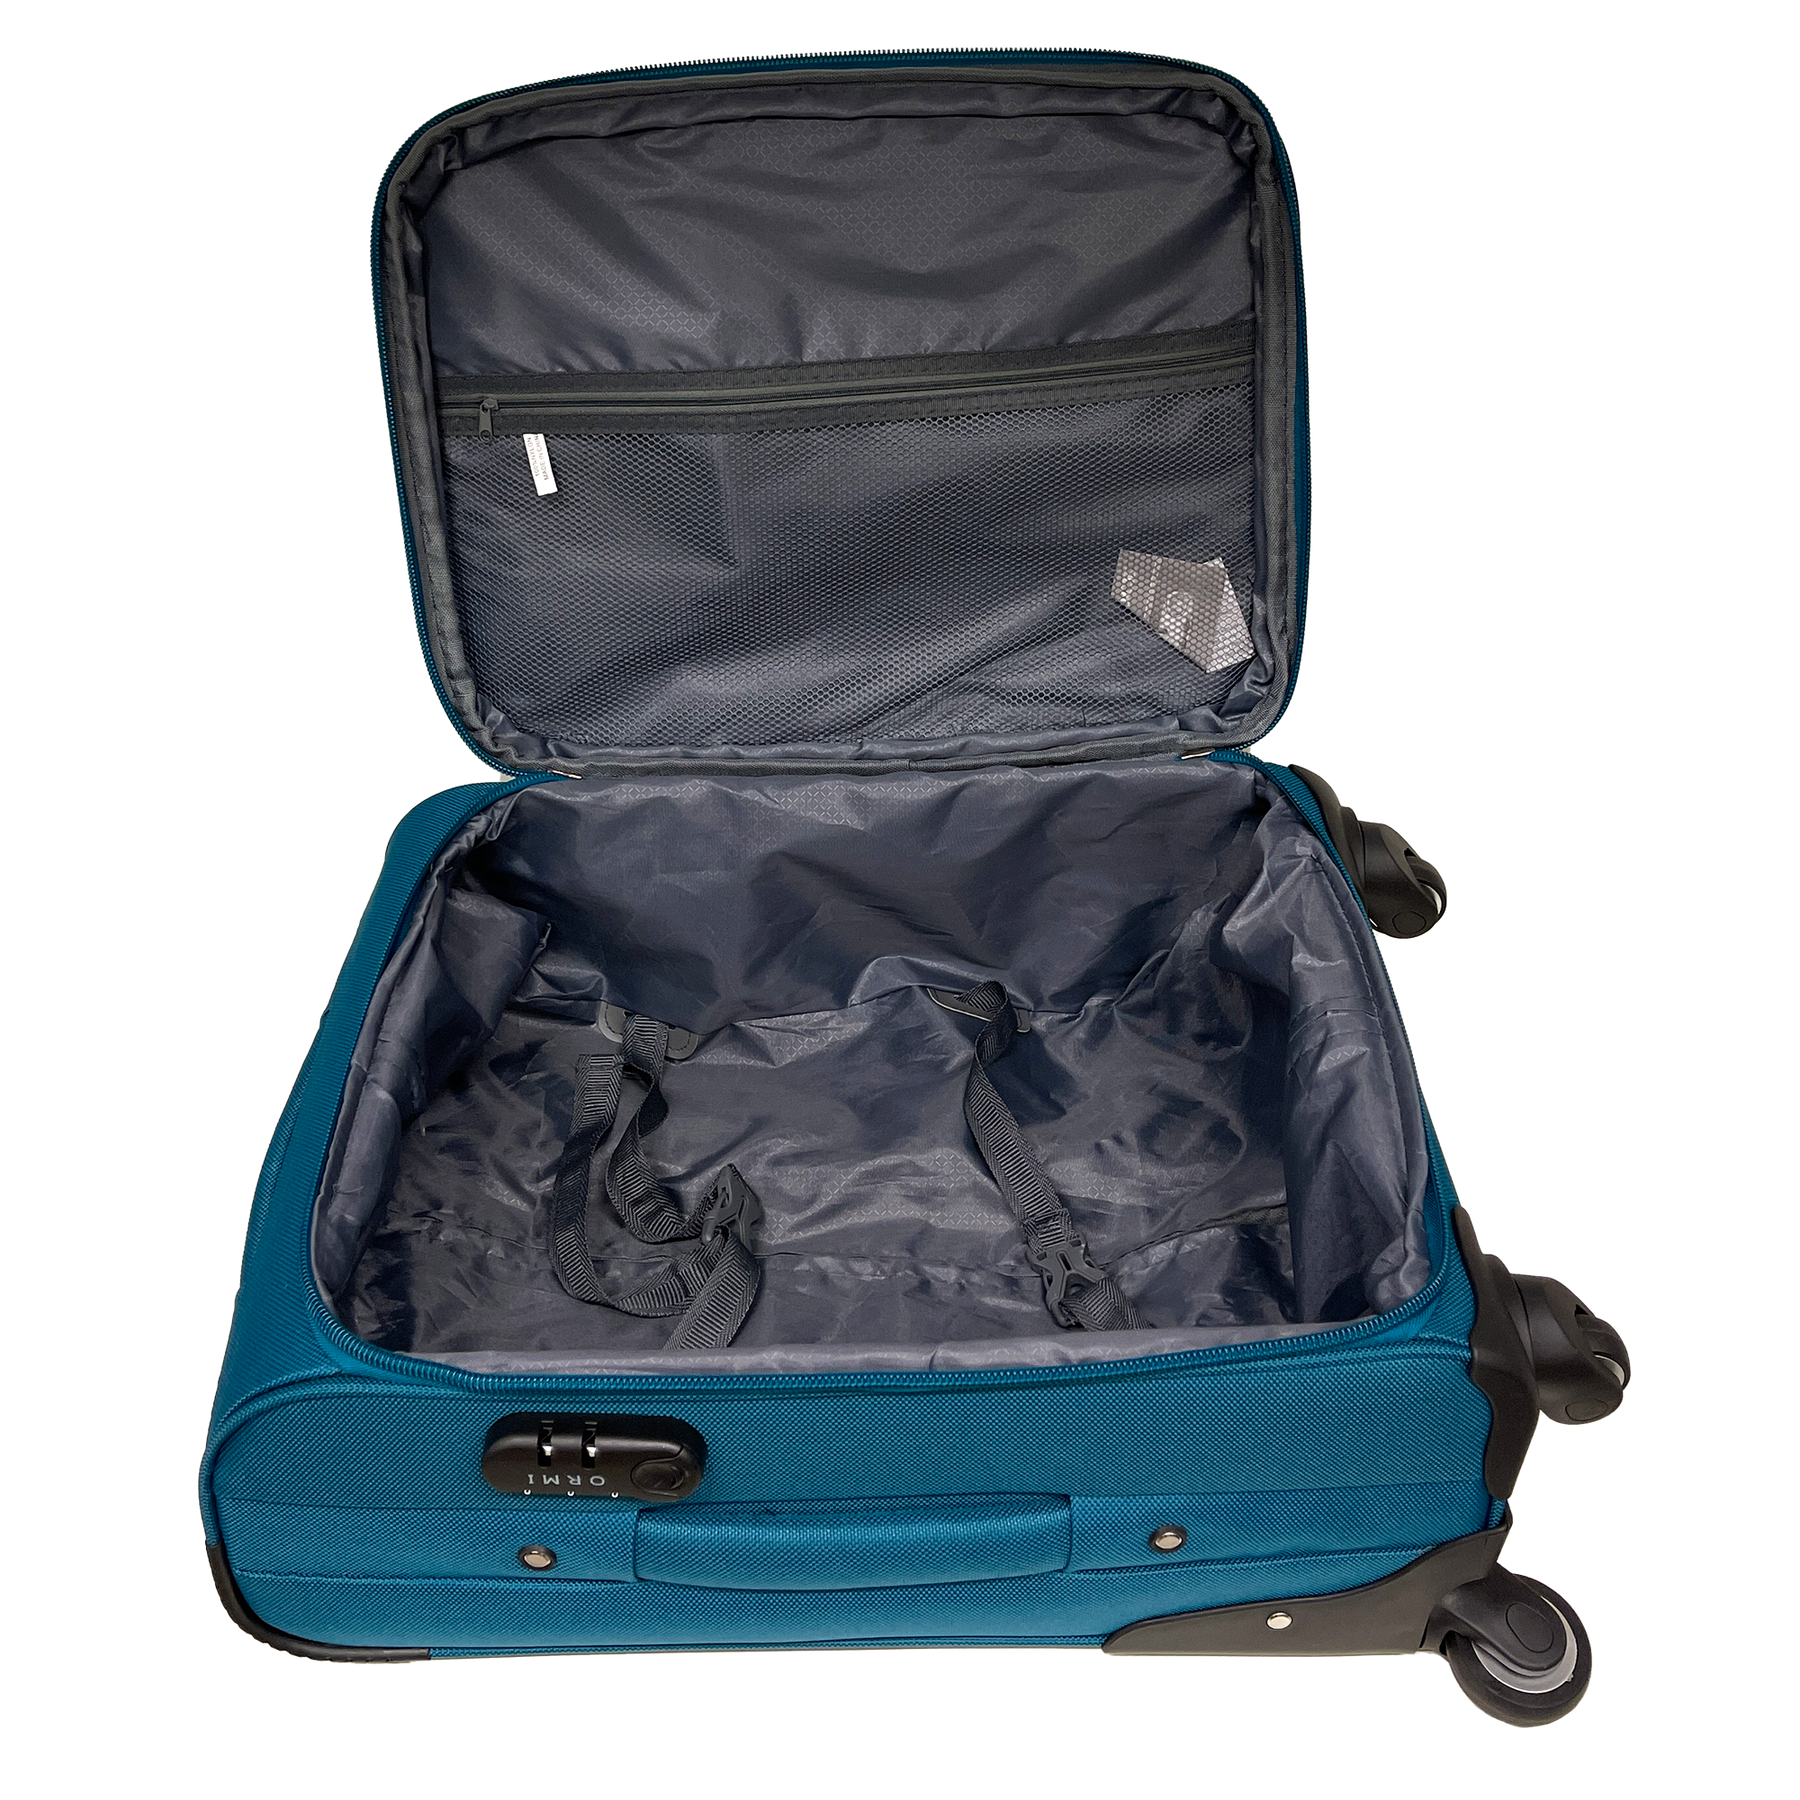 Ormi Semi-rigid Expandable Luggage Set Carry-on + Medium Suitcase - Shock-resistant and Durable Fabric